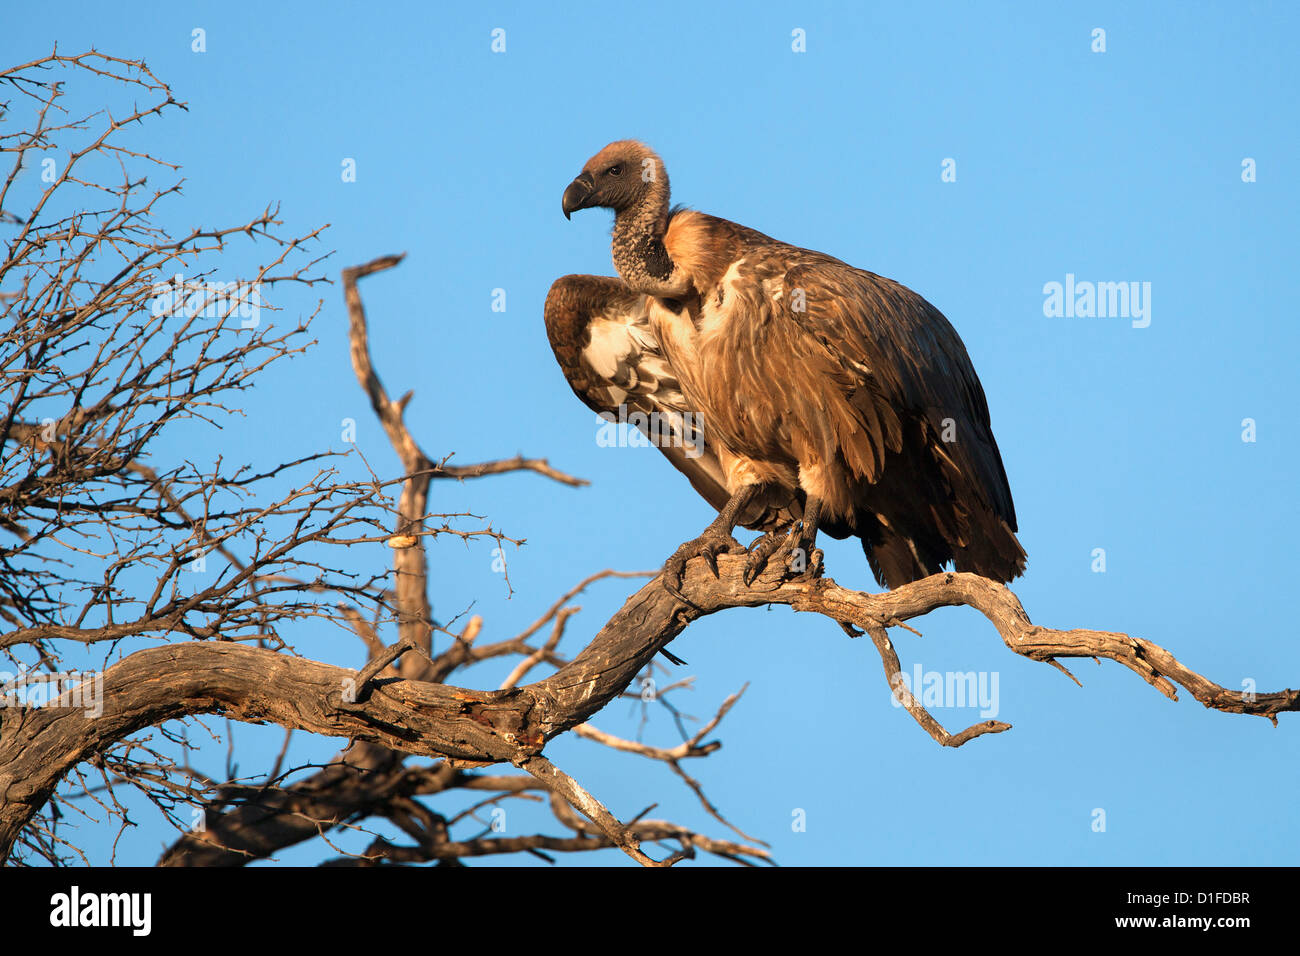 Whitebacked vulture (Gyps africanus), Kgalagadi Transfrontier Park, Northern Cape, South Africa, Africa Stock Photo